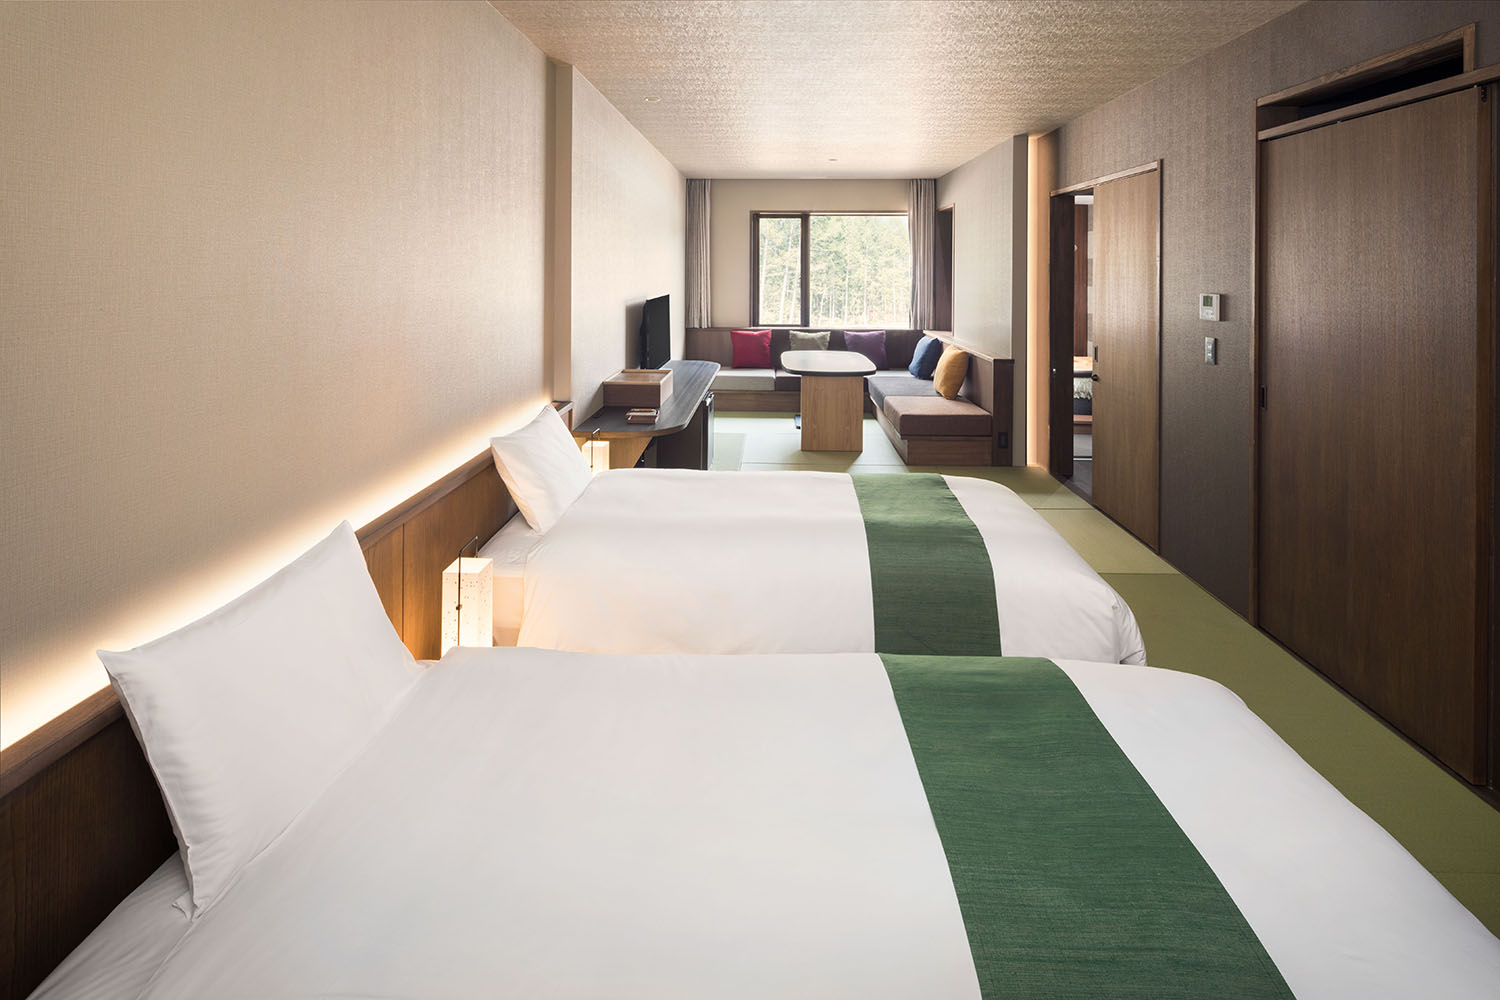 ▲ Japanese-style room twin type (no indoor bath / rain shower only).Up to 1 people can stay in a plus 3 bed.Each room has a different design, but every room has a soft light of Matsuzaki Japanese paper at the entrance and bedside.